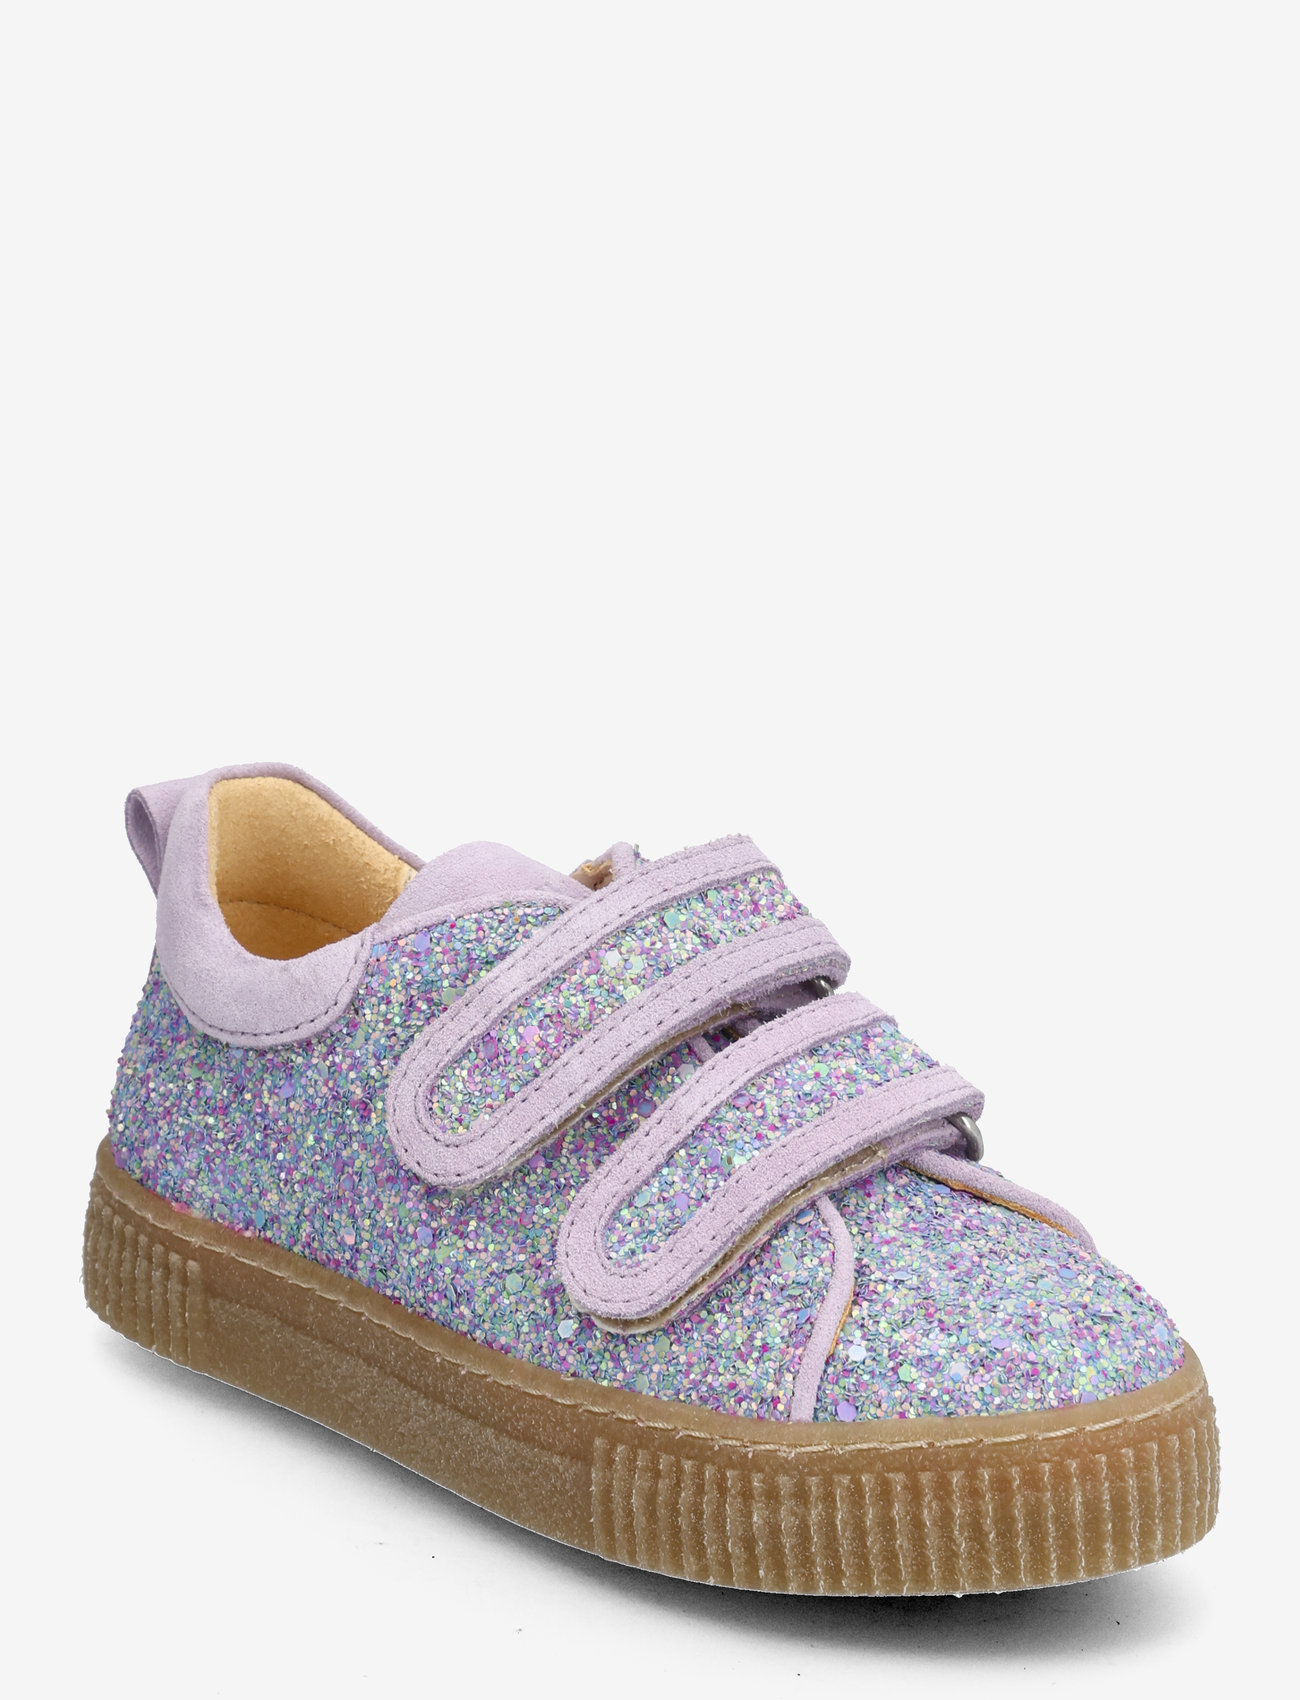 ANGULUS - Shoes - flat - with velcro - gode sommertilbud - 2753/2245 confetti glitter/lil - 0